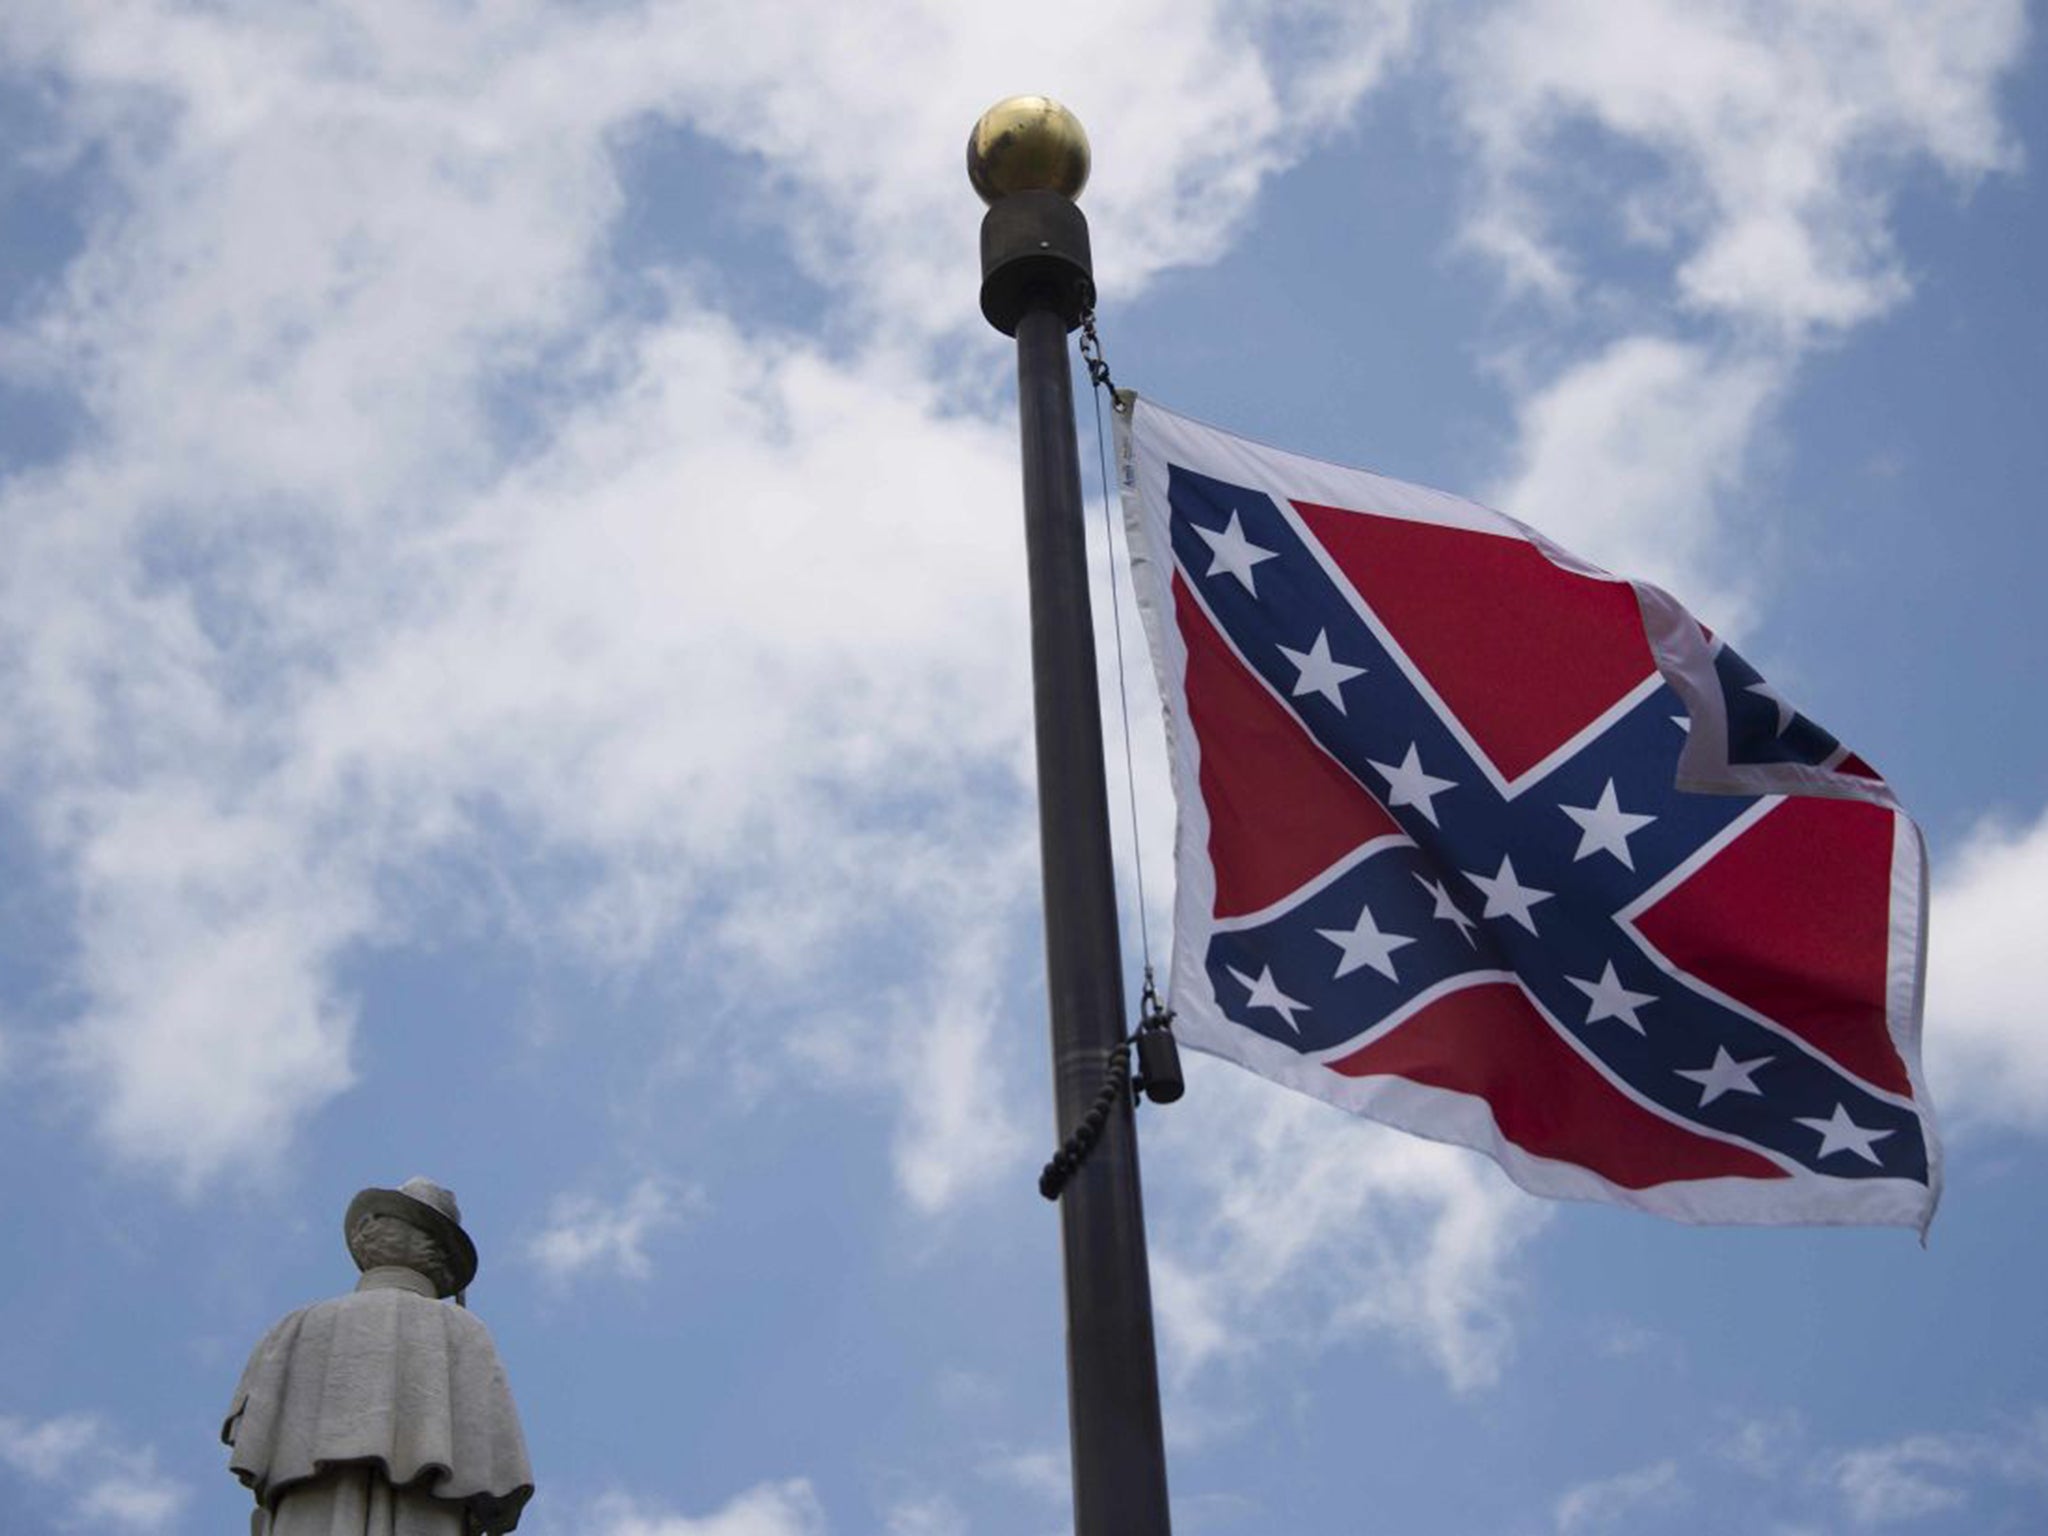 Supporters of the Confederate flag say: “It stands for states’ rights and no big government.”